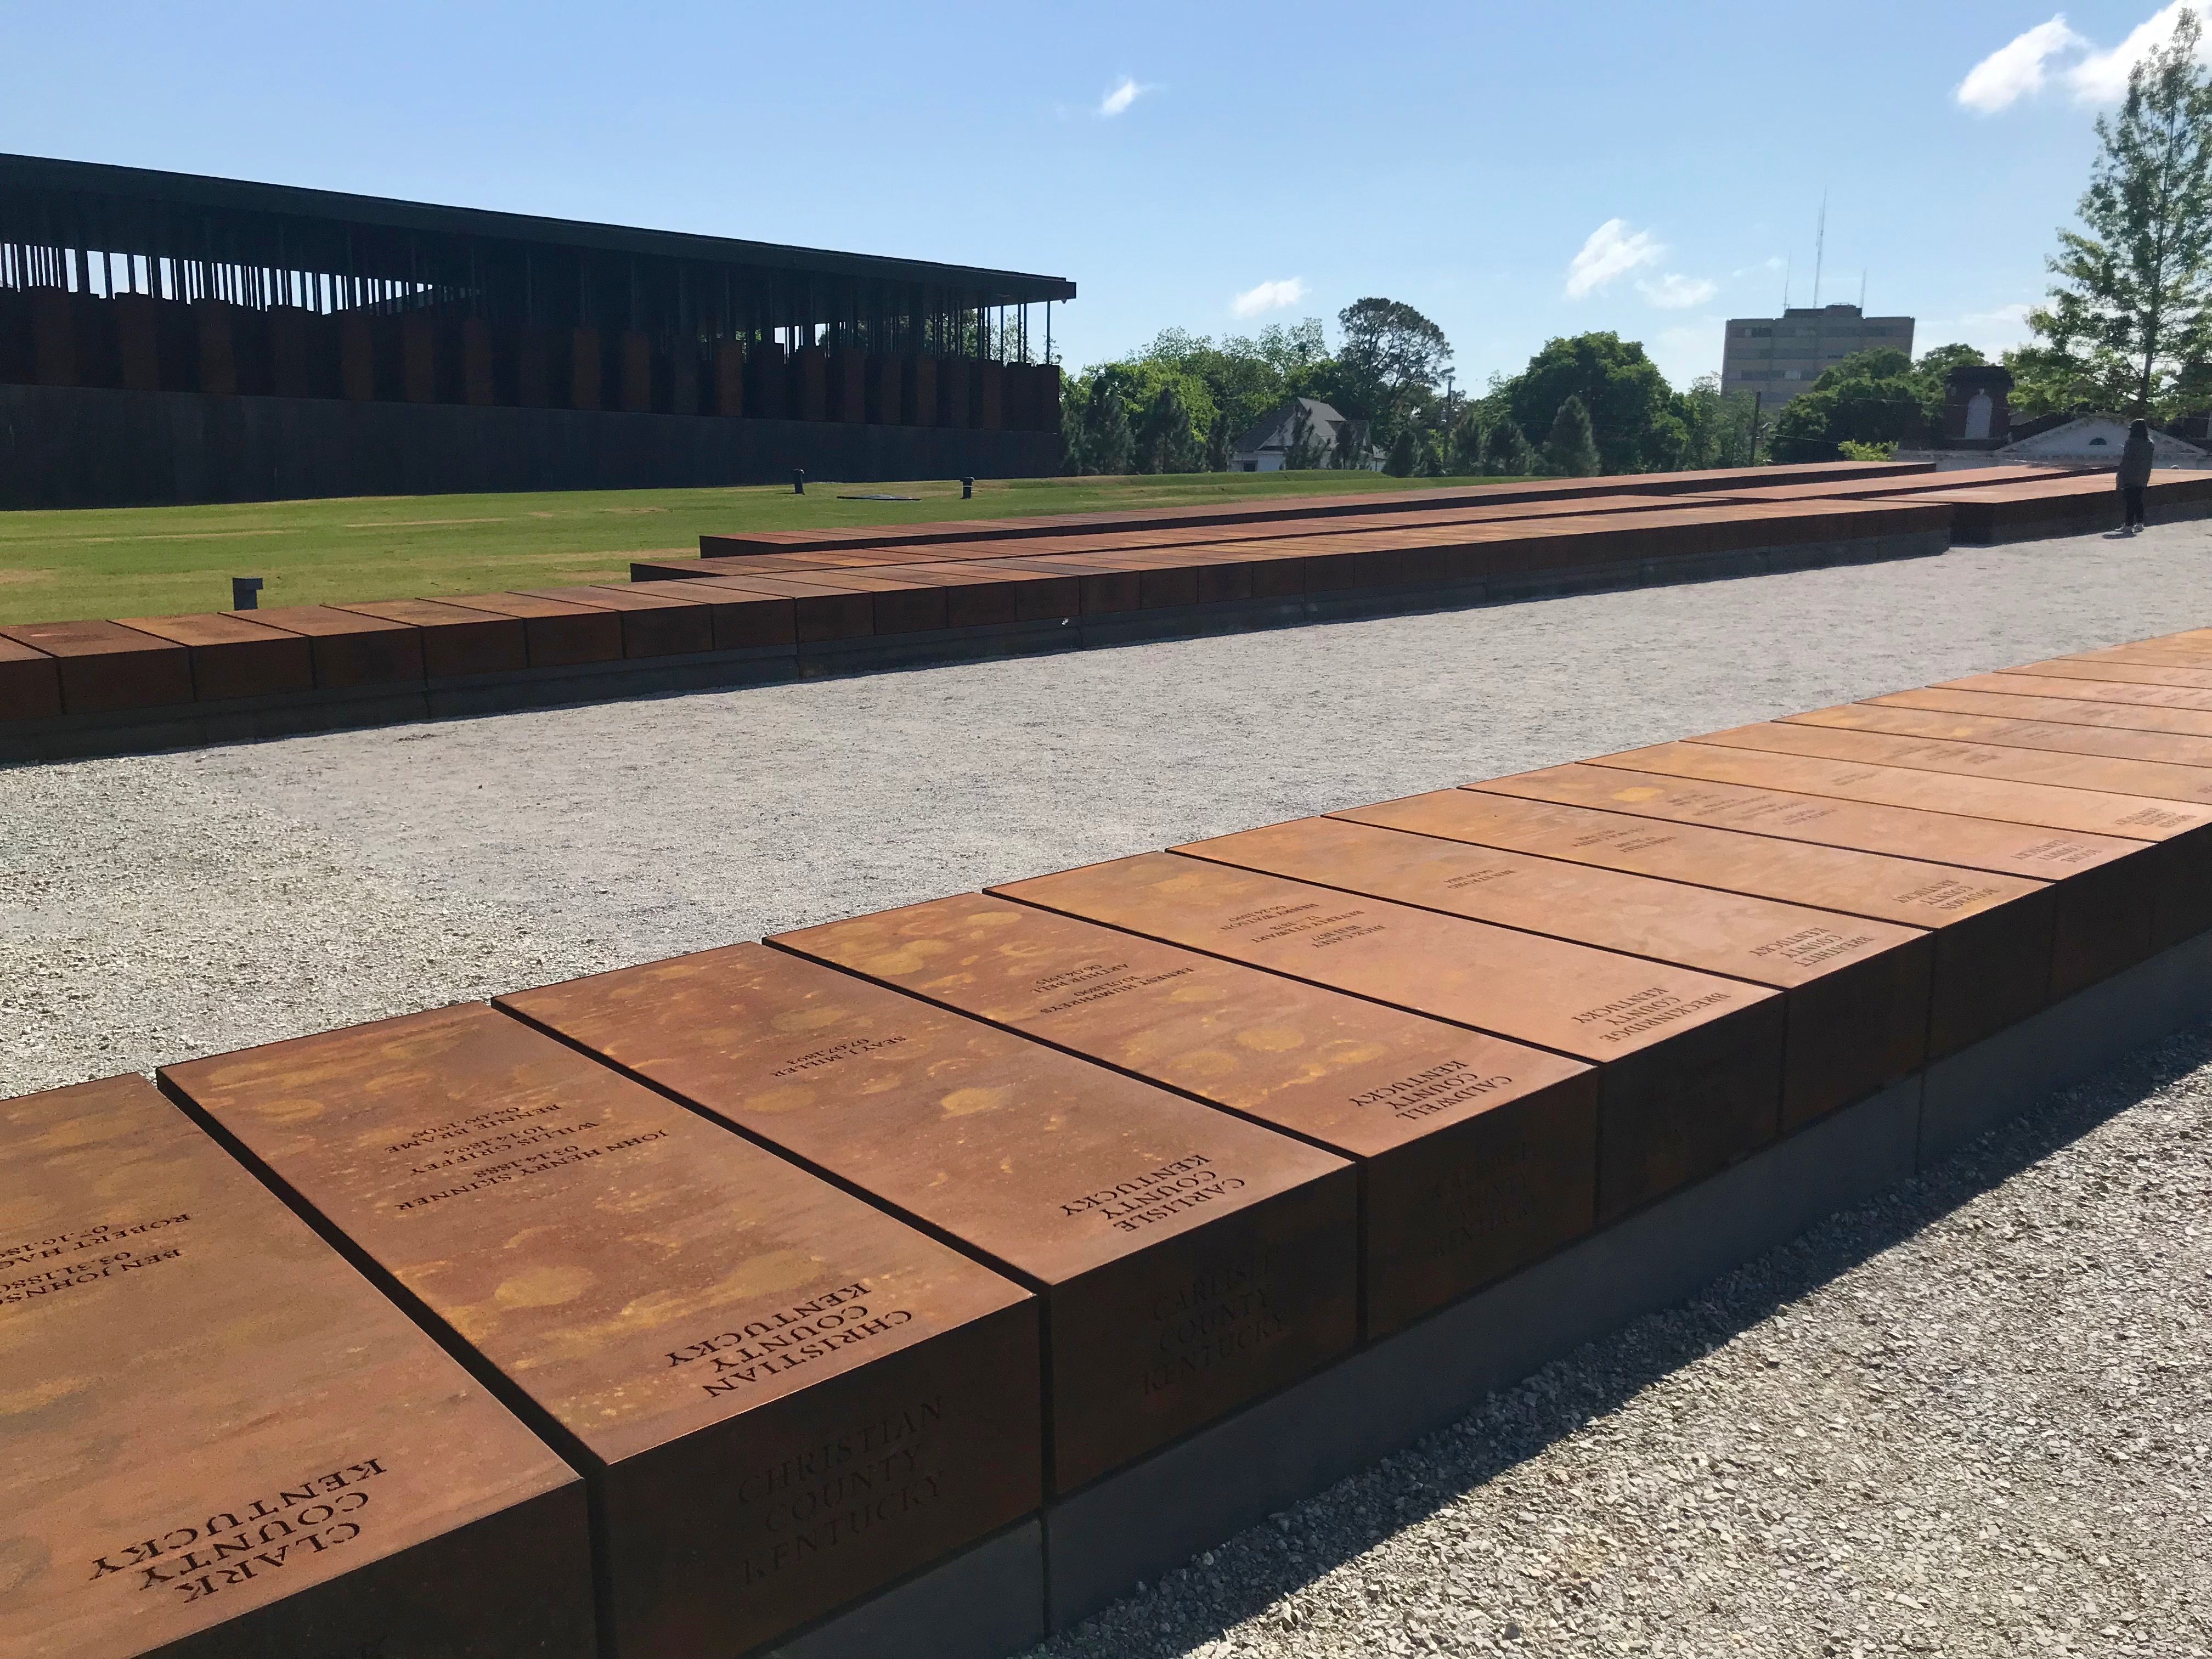 Weathered steel slabs, one for each county where lynchings occurred, available to share with each of the counties involved, at the National Memorial for Peace and Justice. Image by Jon Sawyer. United States, 2018.